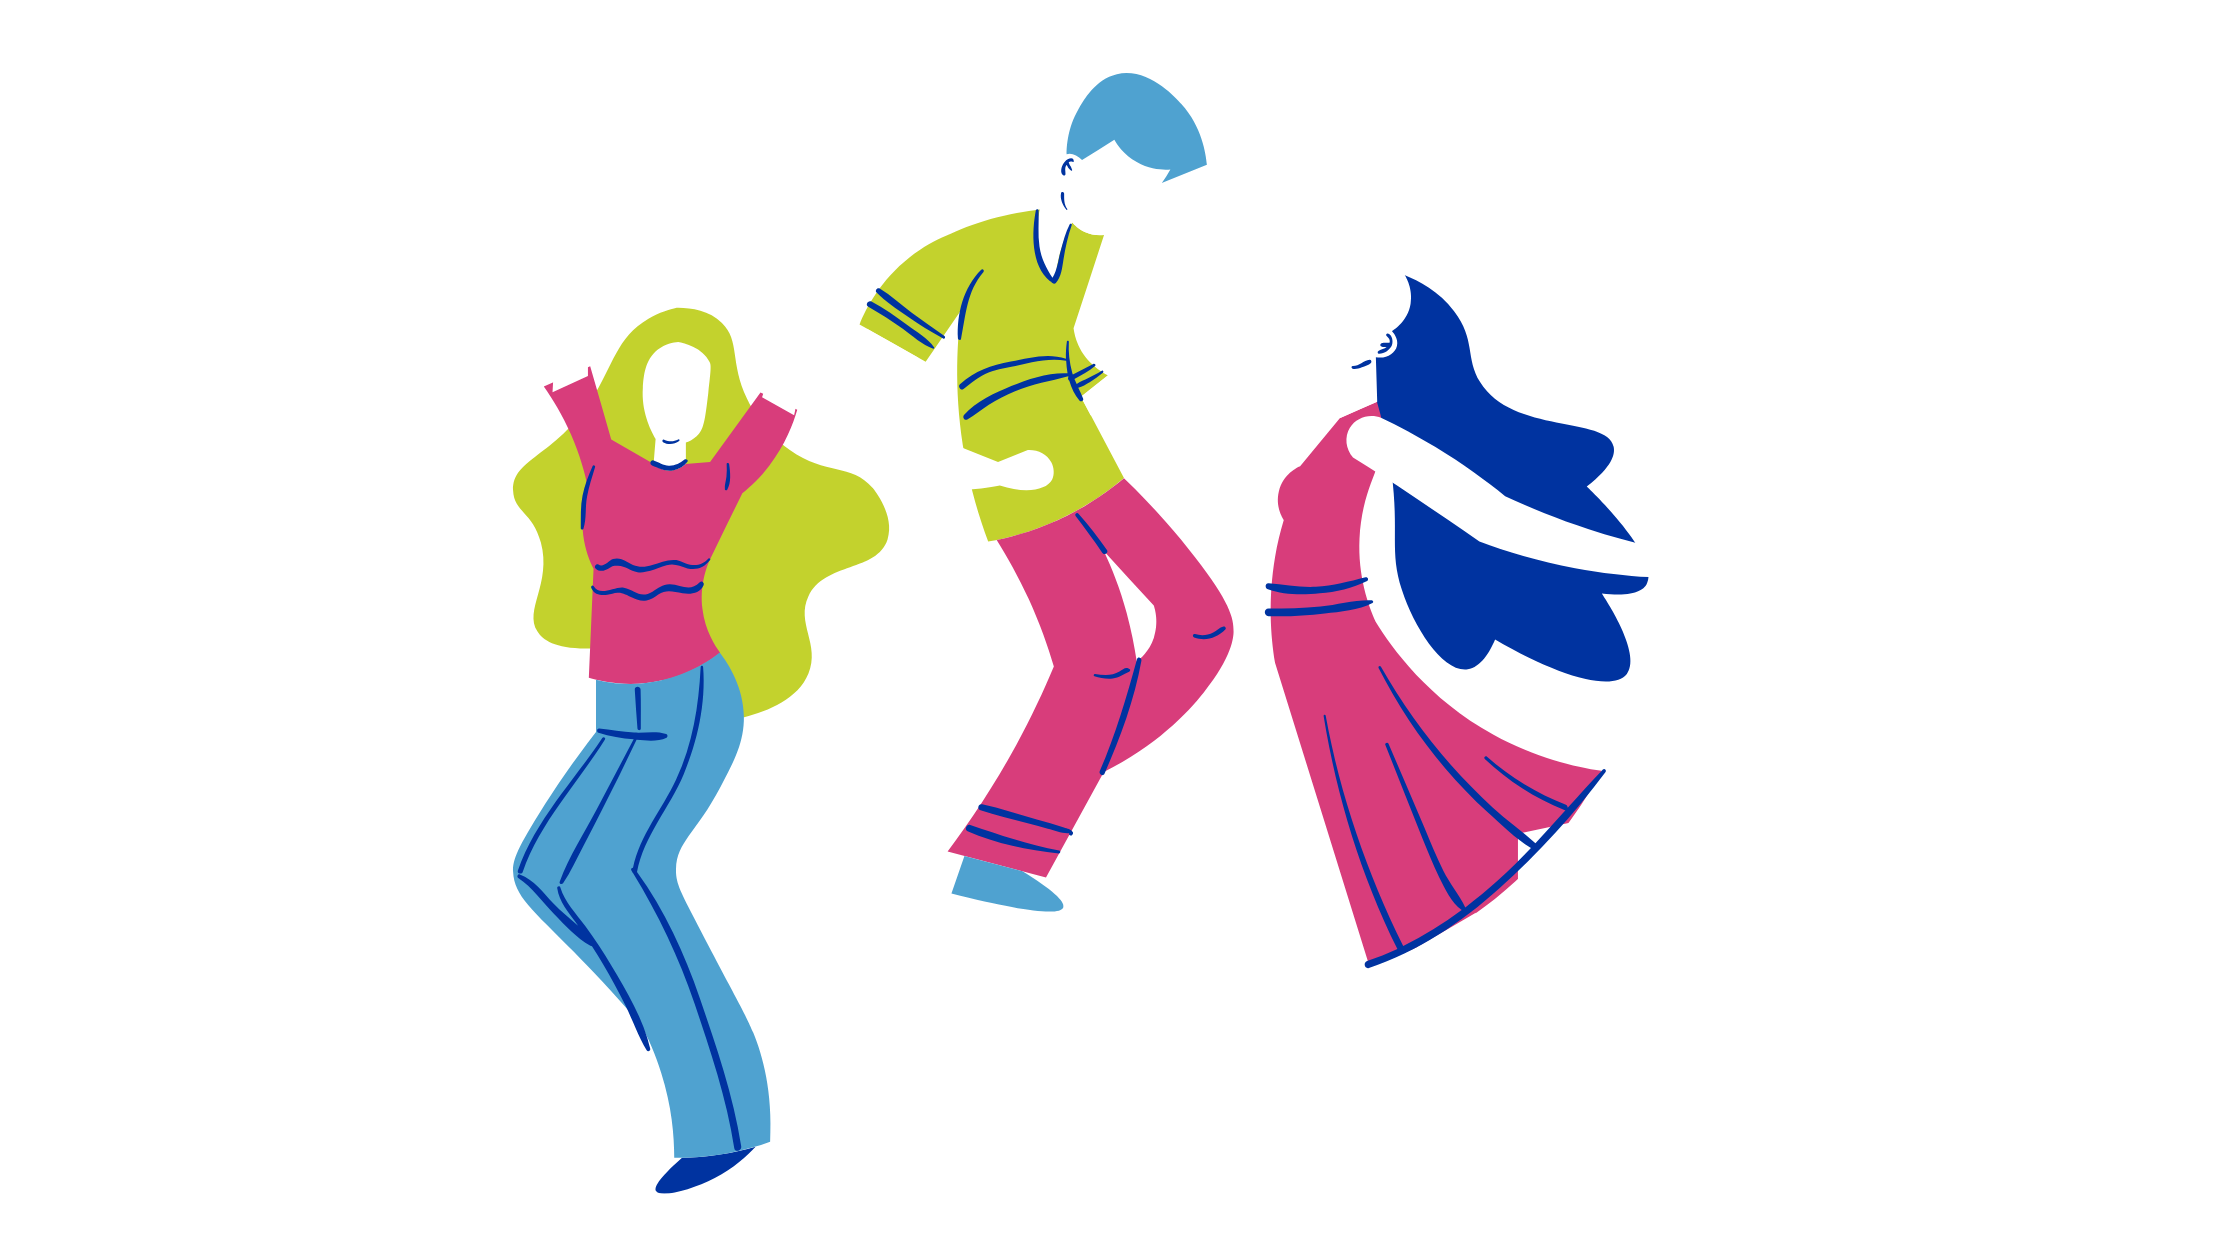 A pictogram of people dancing